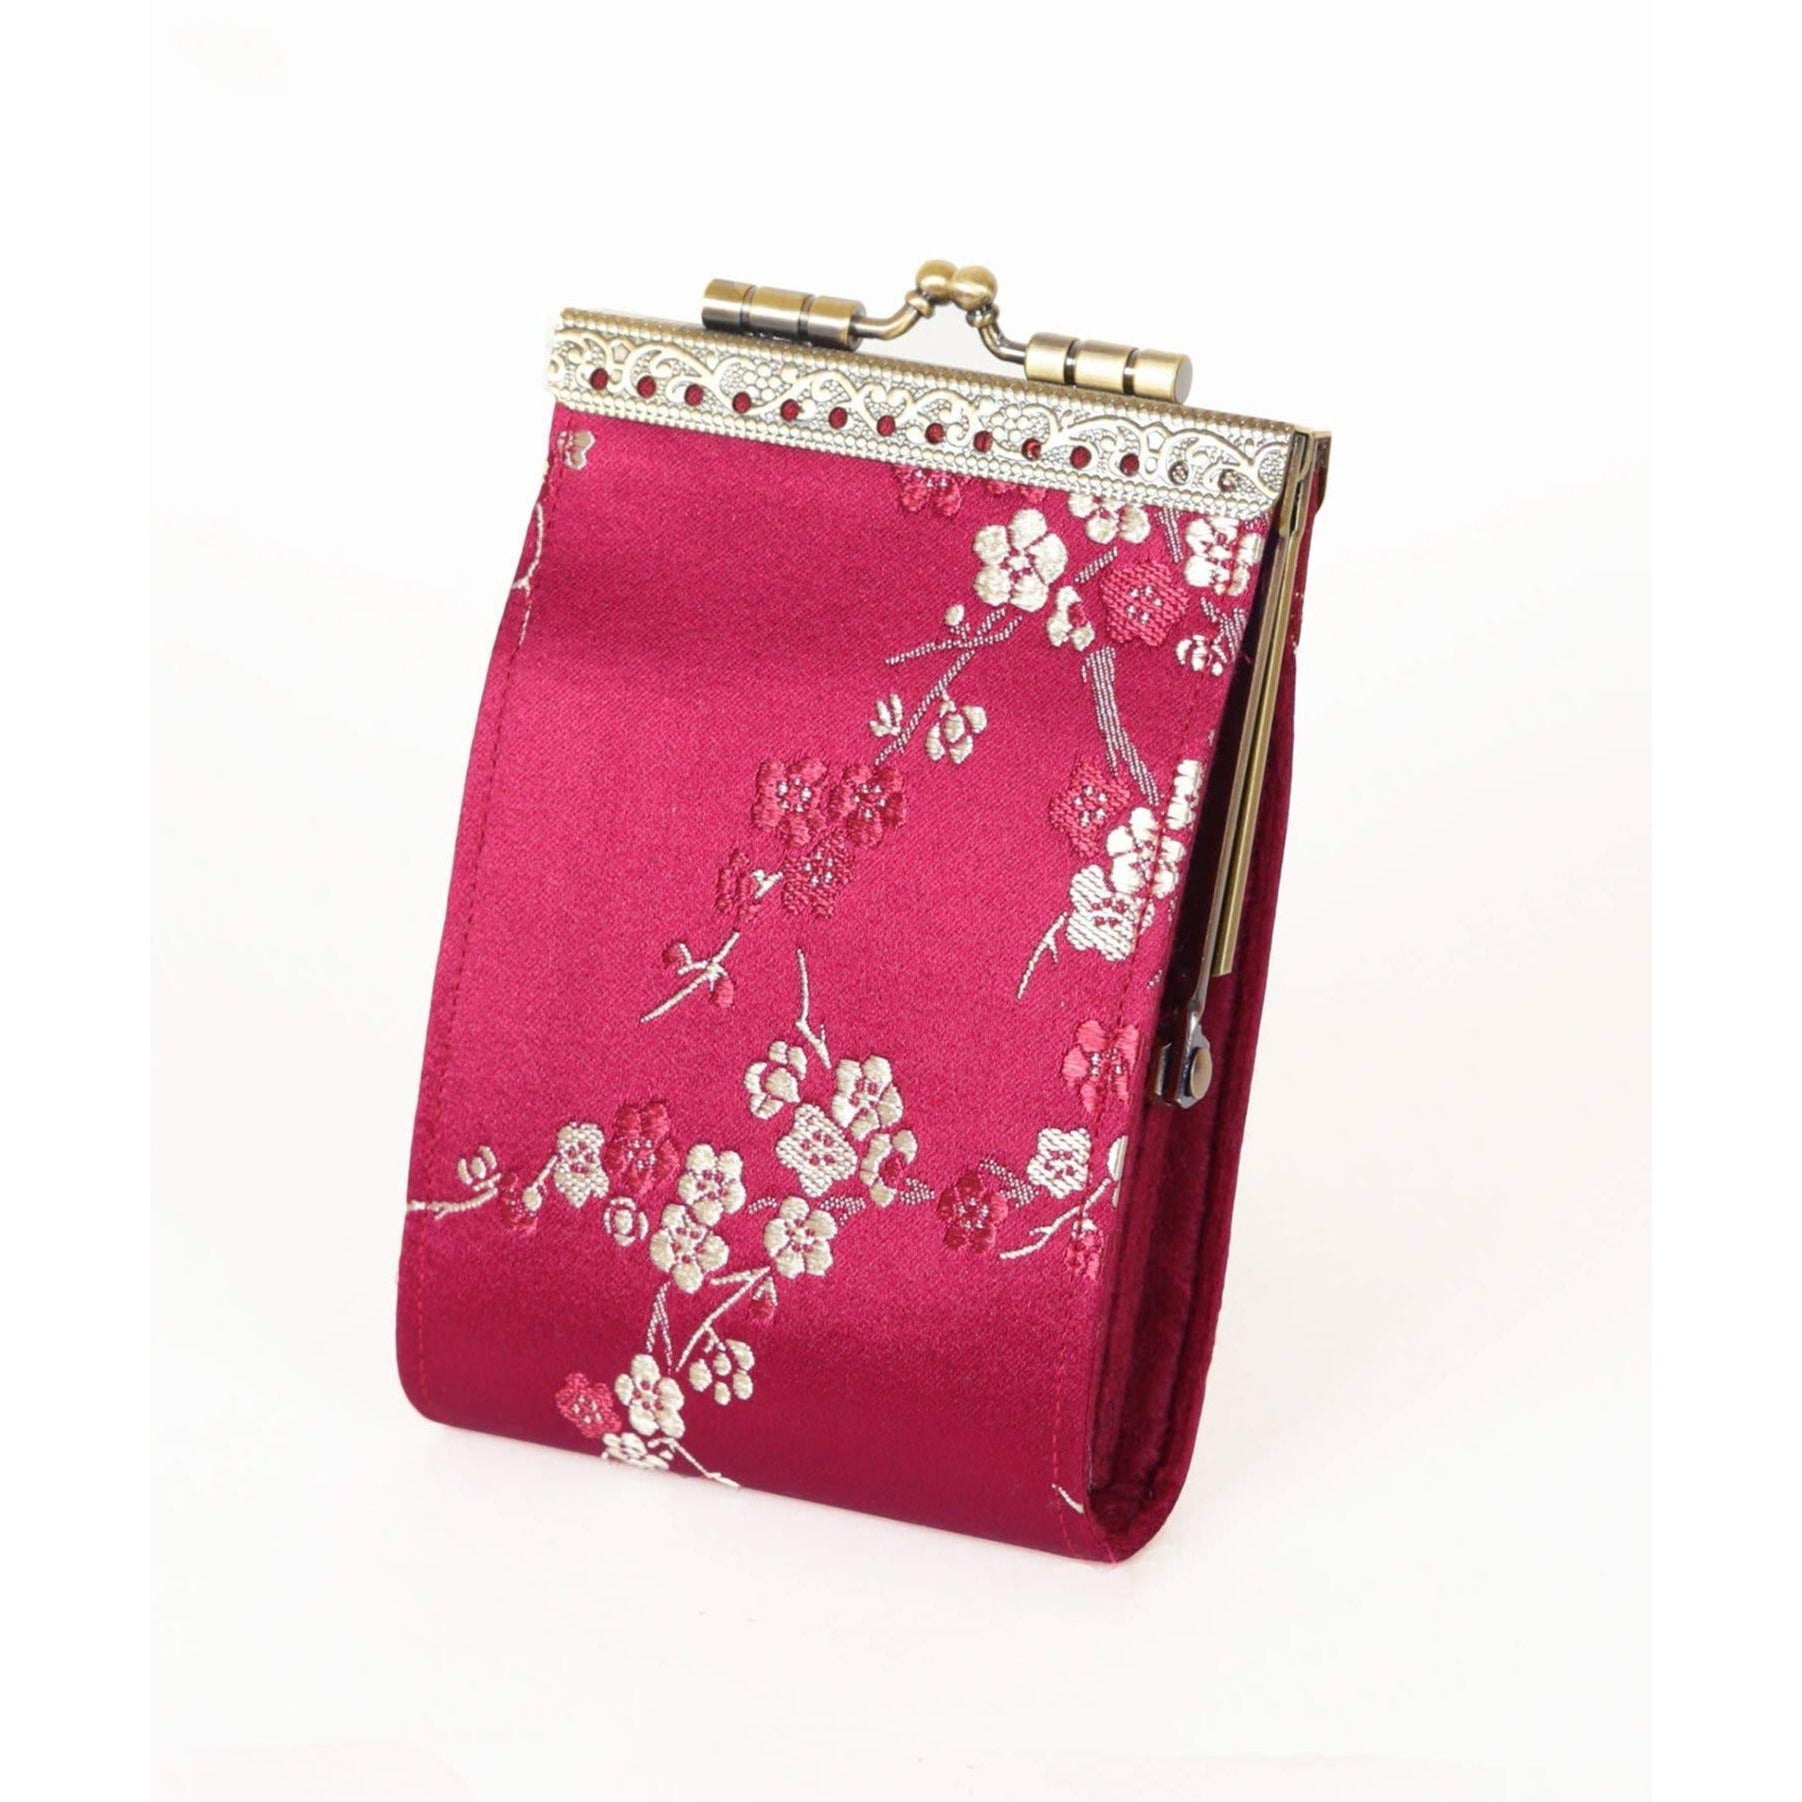 Vintage Cherry Blossom Leather Long Wallet Organizer with Zipper Purse  Clutch Bag for Women Men